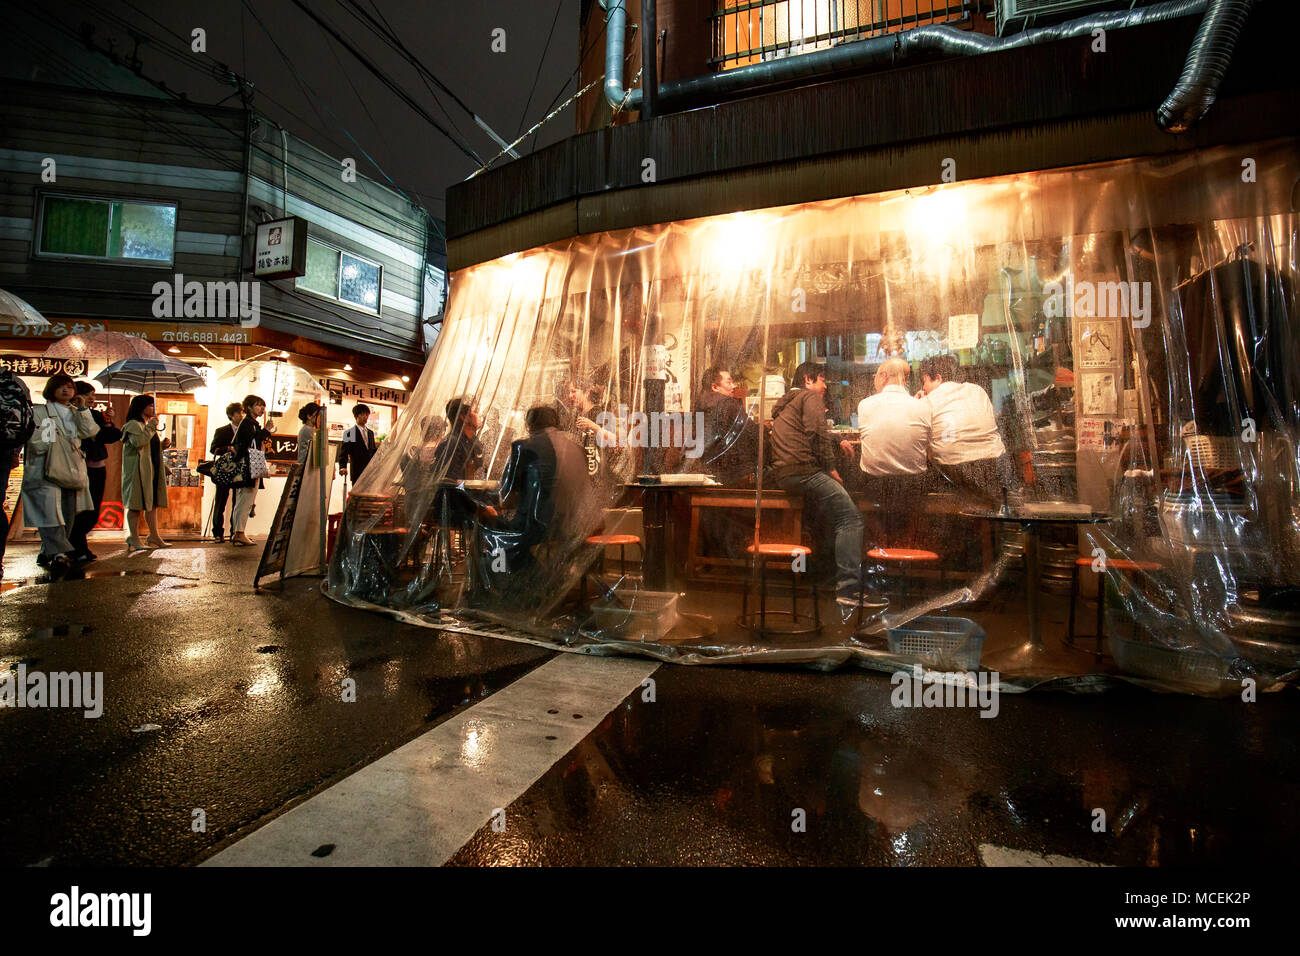 Osaka, Japan - April 14, 2018: Customers drink in a corner bar sheltered from the wind and rain by a clear plastic curtain Stock Photo